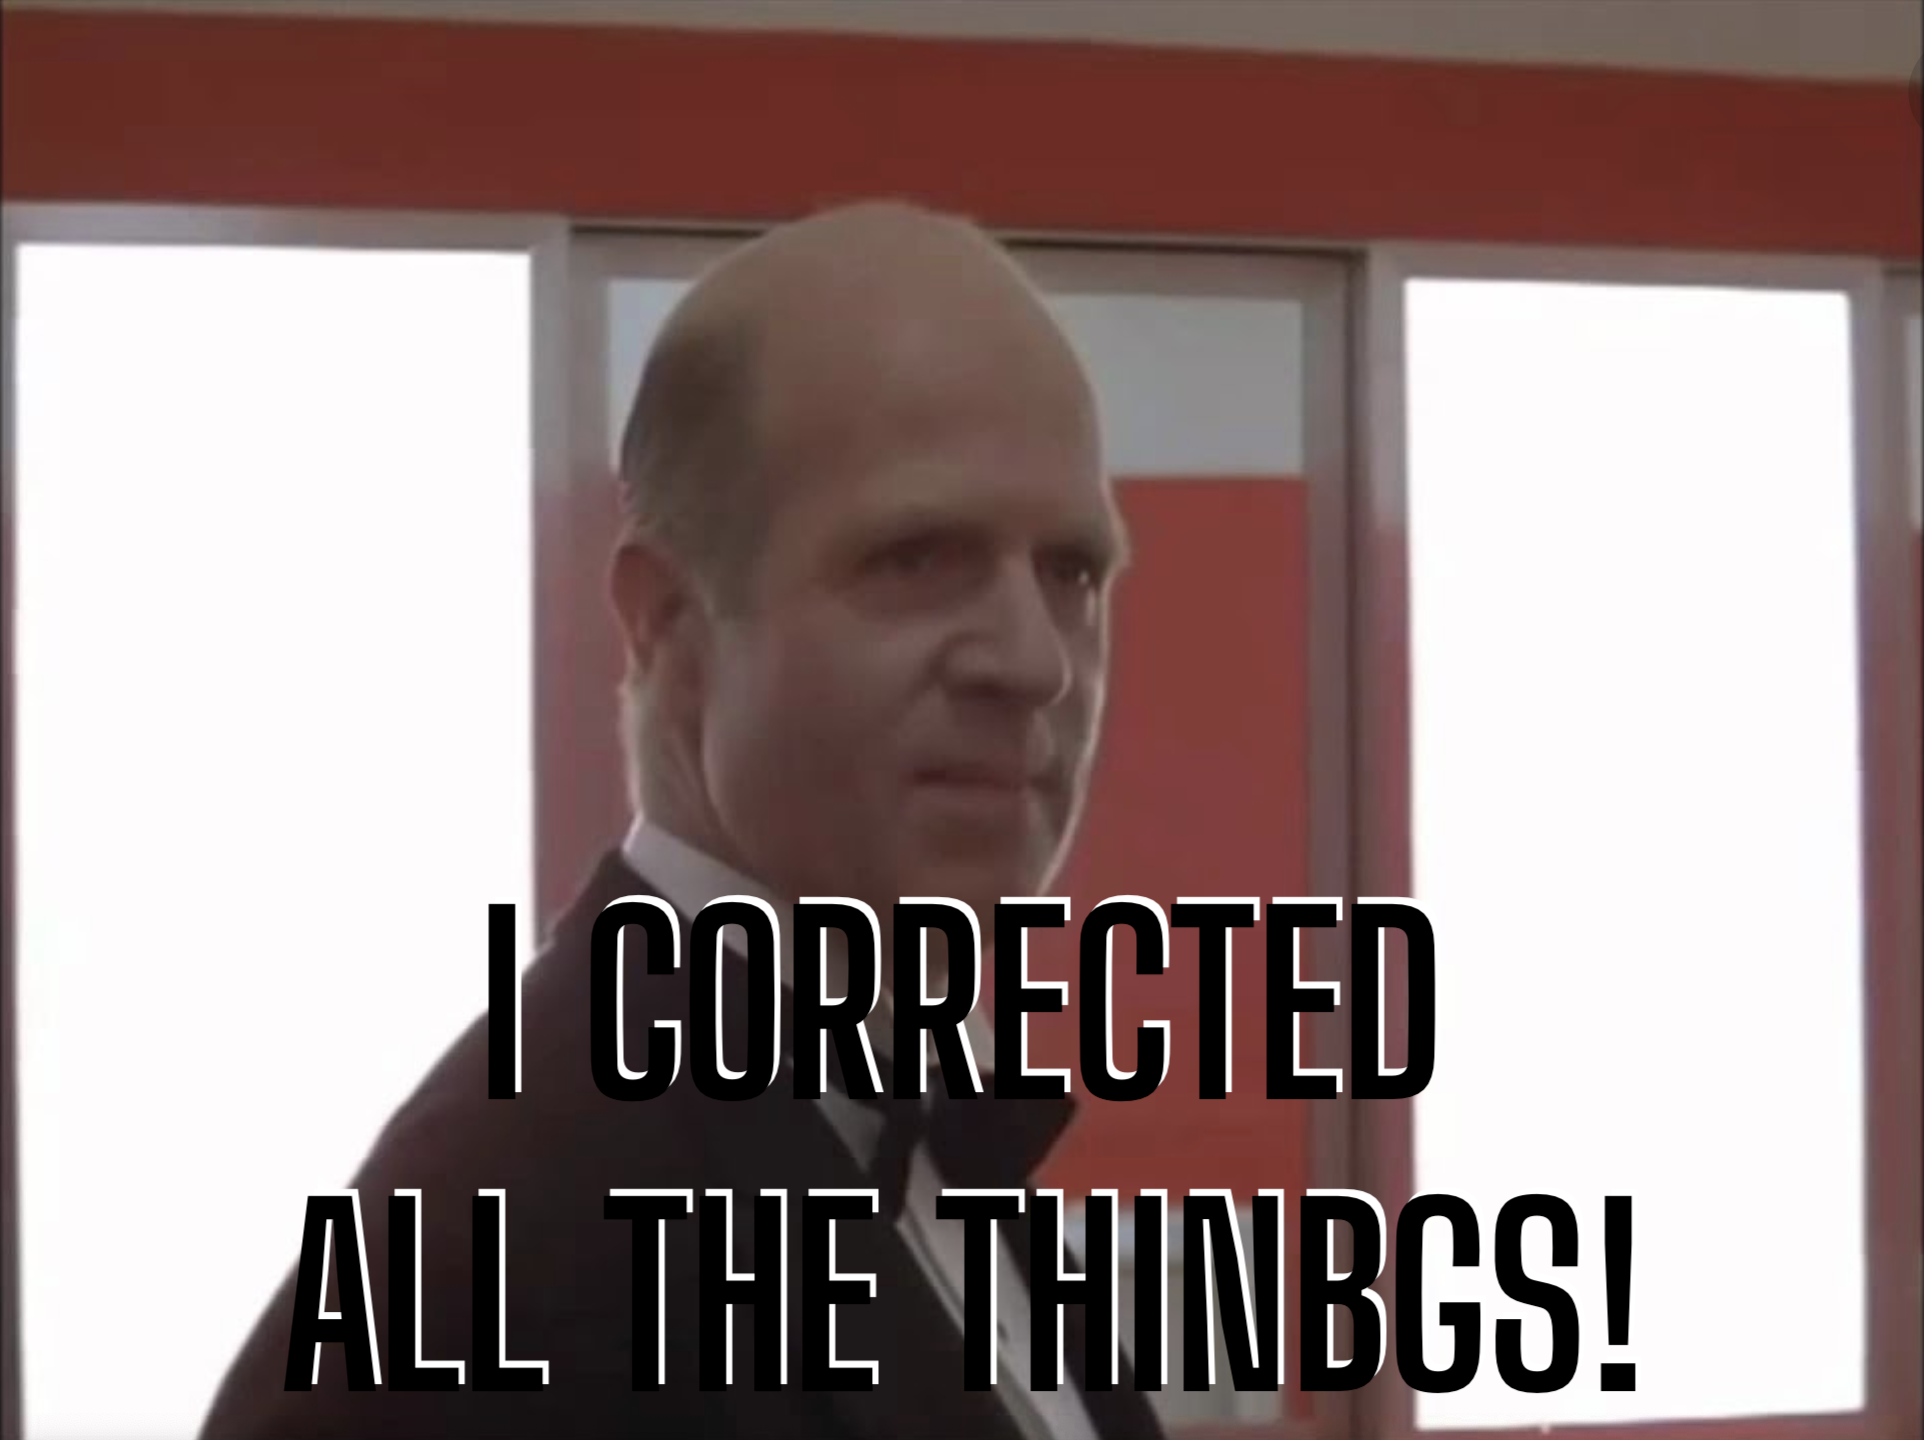 This image shows a meme of the crazy butler character from the Shining, who tells a dramatic and terrifying story of correcting his children. The image says, "I corrected all the thinbgs." It contains a misspelling of "things." That's the joke.